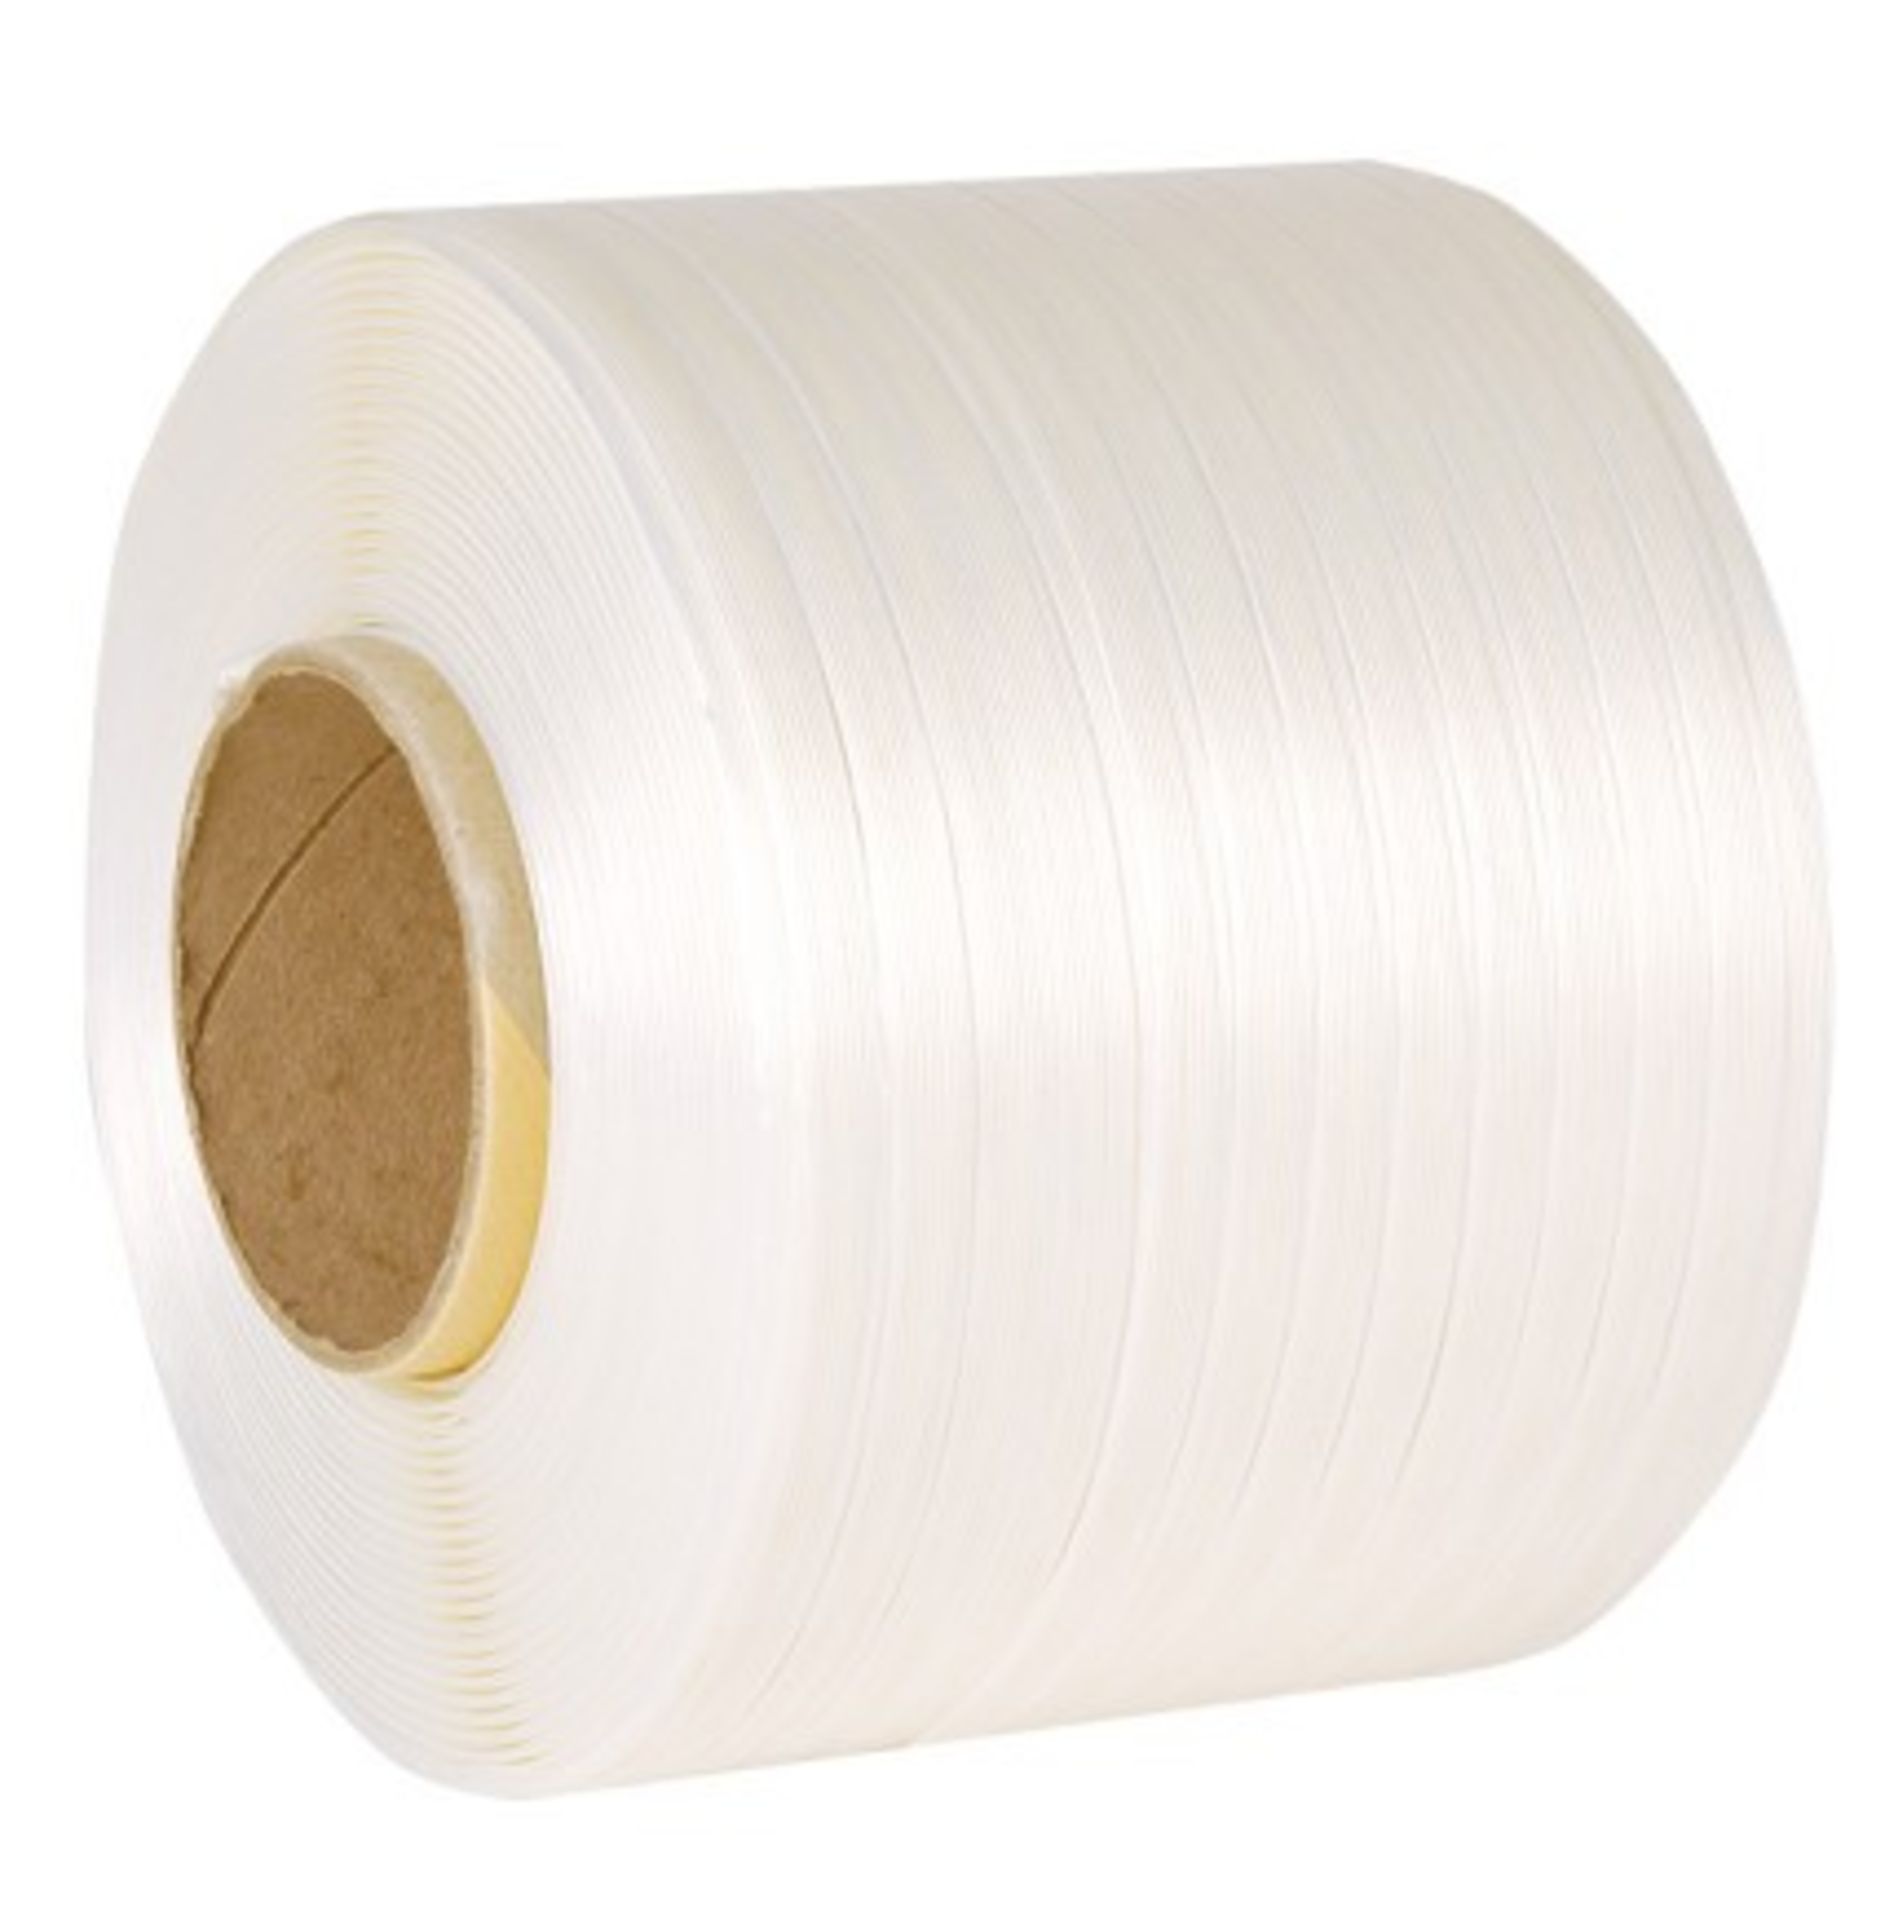 1 BOX OF 6 13MM WHITE BALE STRAPS - P/N 181 / RRP £119.94 (VIEWING HIGHLY RECOMMENDED)